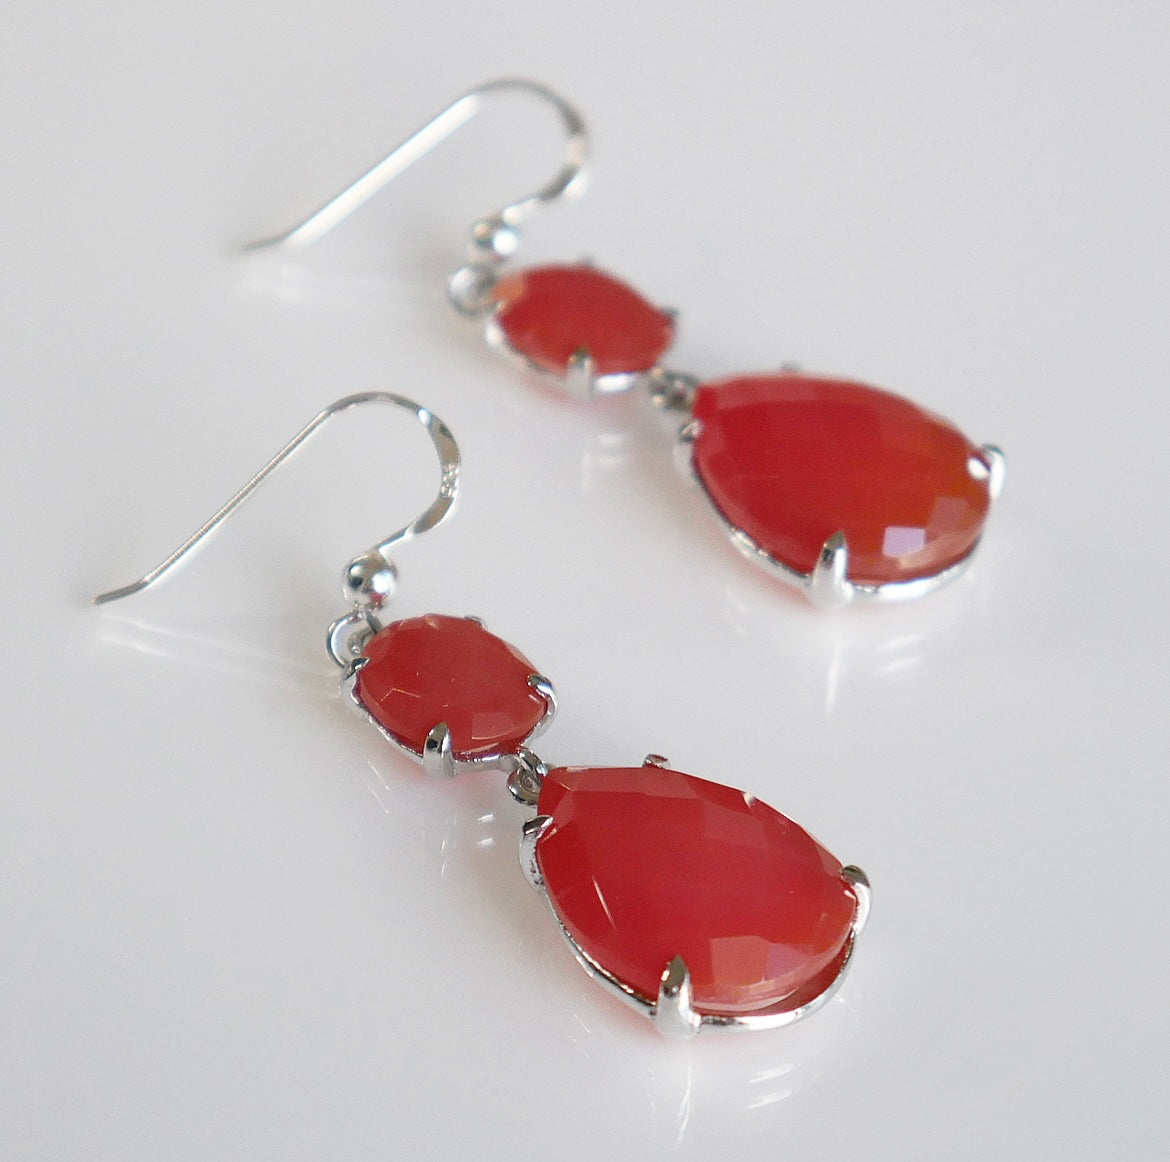 Red onyx earrings, orange gemstone earrings, orange crystal earrings, orange crystal, crystals jewelry in sterling silver, shopping in Miami, lucky gemstone jewelry, lucky crystals jewelry, onyx jewelry, onyx earrings, shopping in Miami, shopping in Brickell, jewelry store in Miami, things to do in Miami